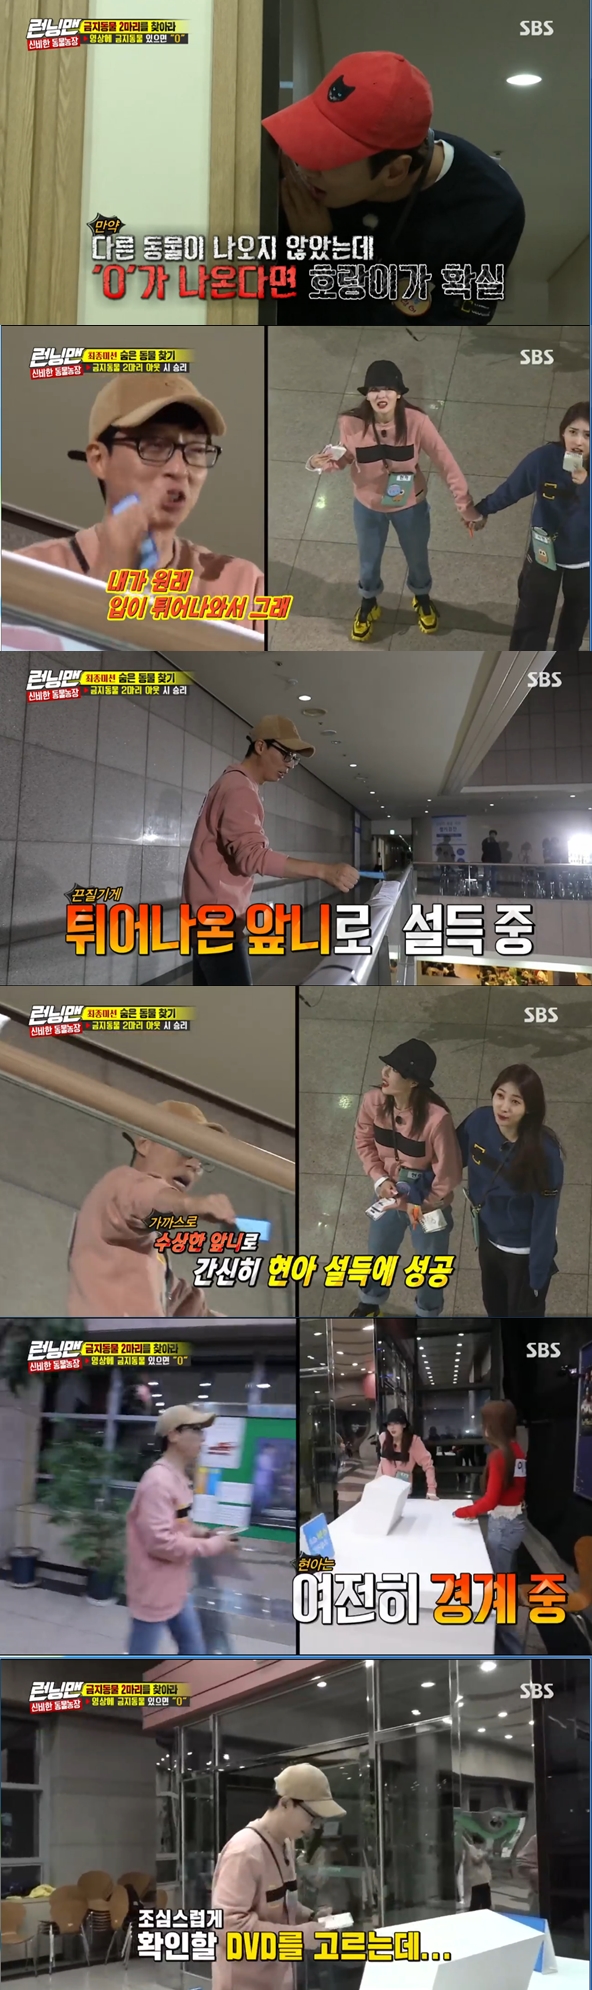 Hyuna was doing another Alone recording.In the SBS entertainment program Running Man broadcasted on the 17th night, a mysterious animal farm race was held last week to catch banned animals hidden among ordinary animals.The hints were mixed and the members were confused. Each hint was suspected of being an animal, but the members were not convinced.Yoo Jae-Suk, who did not write a DVD rental hint, found her to see the hint with Hyona.But Hyuna didnt come to him, wary of Yoo Jae-Suk.Yoo Jae-Suk persuaded her to keep looking at the hint, but Hyuna continued to suspect him, saying, Why do you see the front teeth?Eventually, Hyuna, who came to see the hint with Yoo Jae-Suk, seemed to take another genre of Alone, suspicious of everyone until the end.